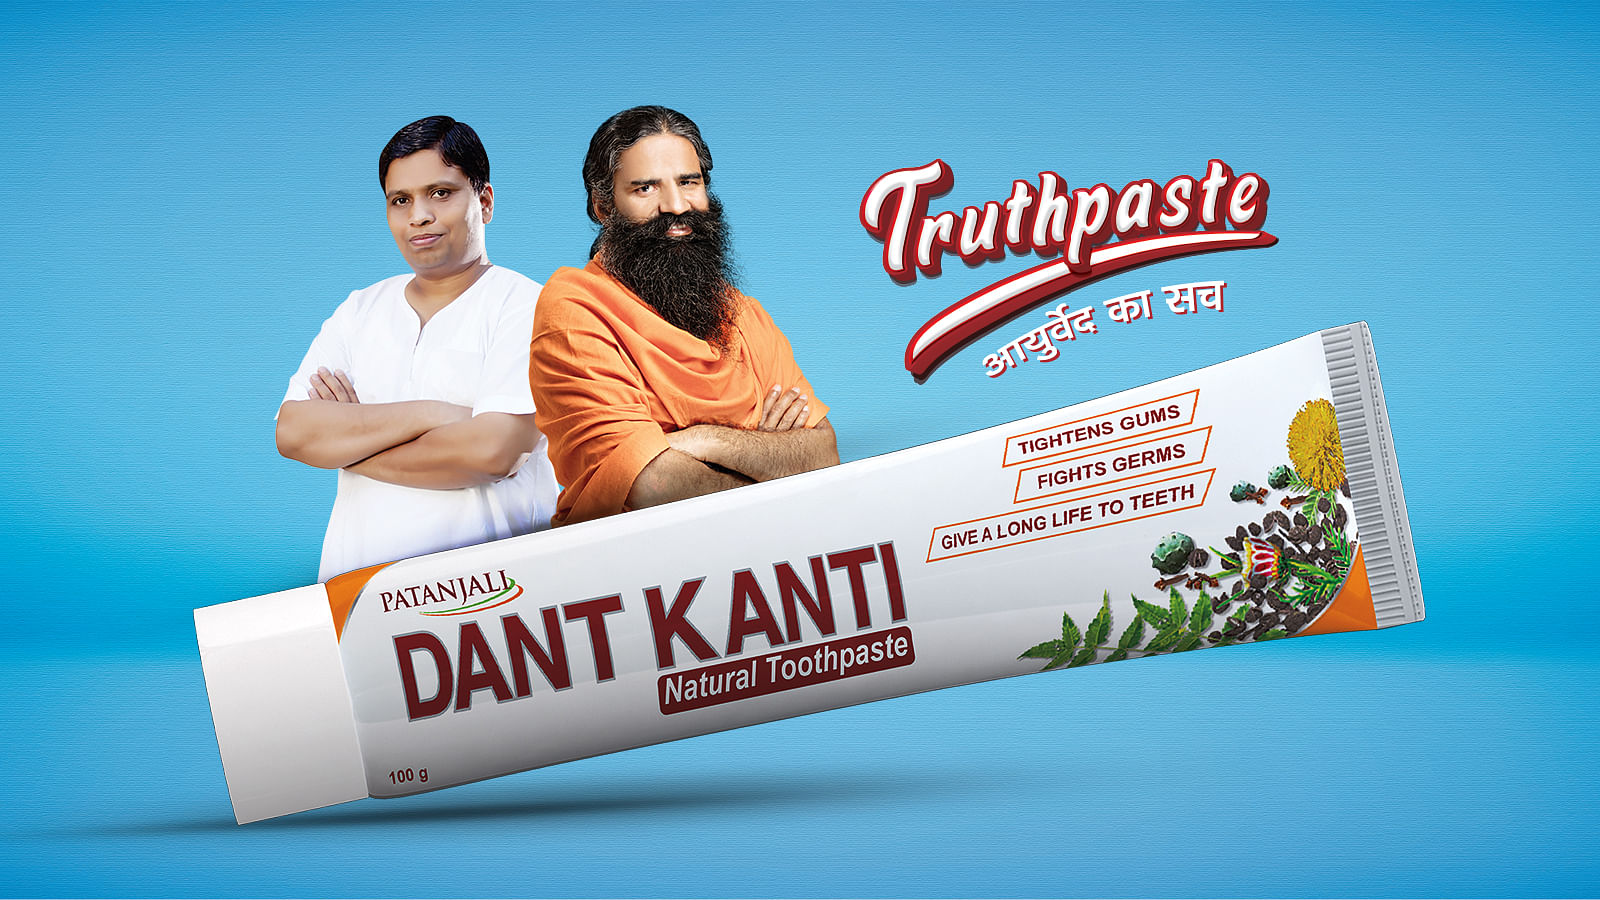 Patanjali preparing to regain toothpaste mkt, expand distribution channels  | News - Business Standard